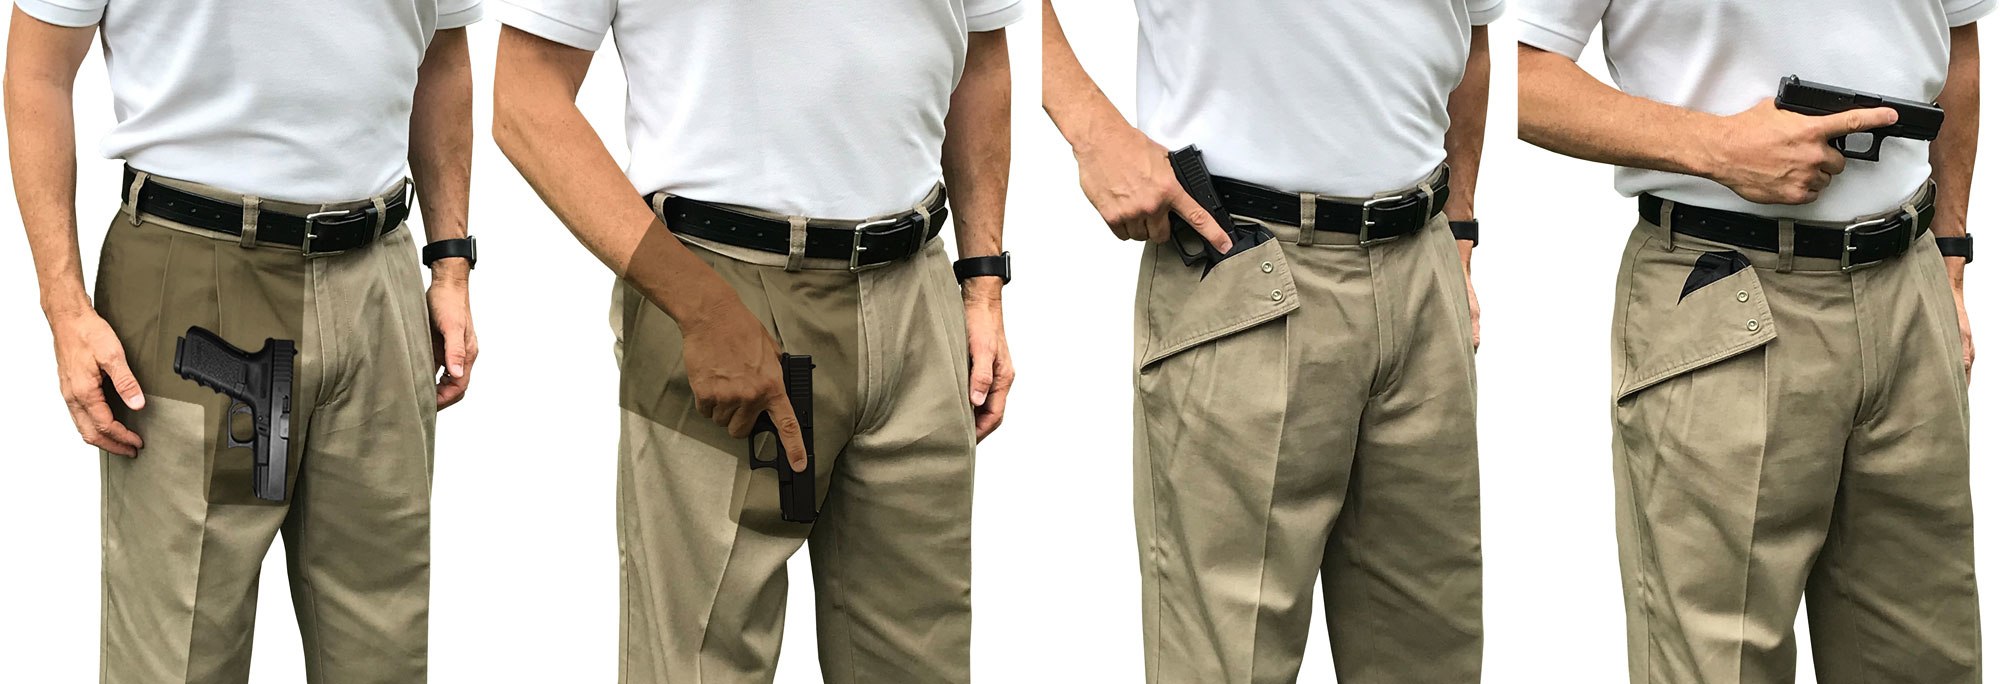 Concealed Carry Holsters and Concealed Carry Pants: Comfortable Deep Fast